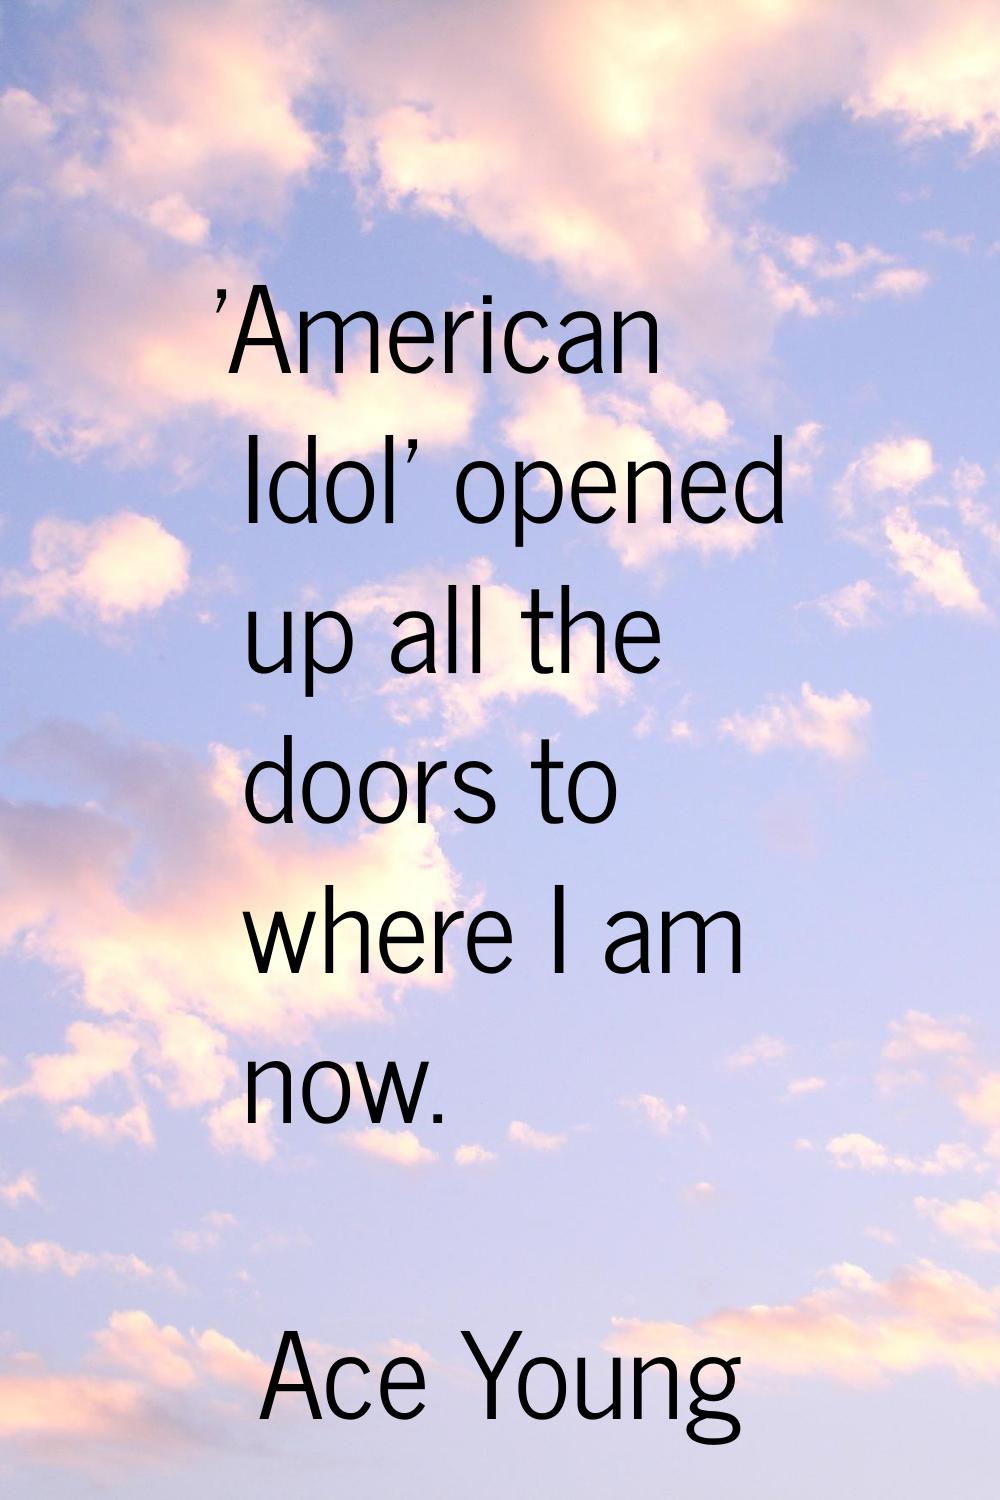 'American Idol' opened up all the doors to where I am now.